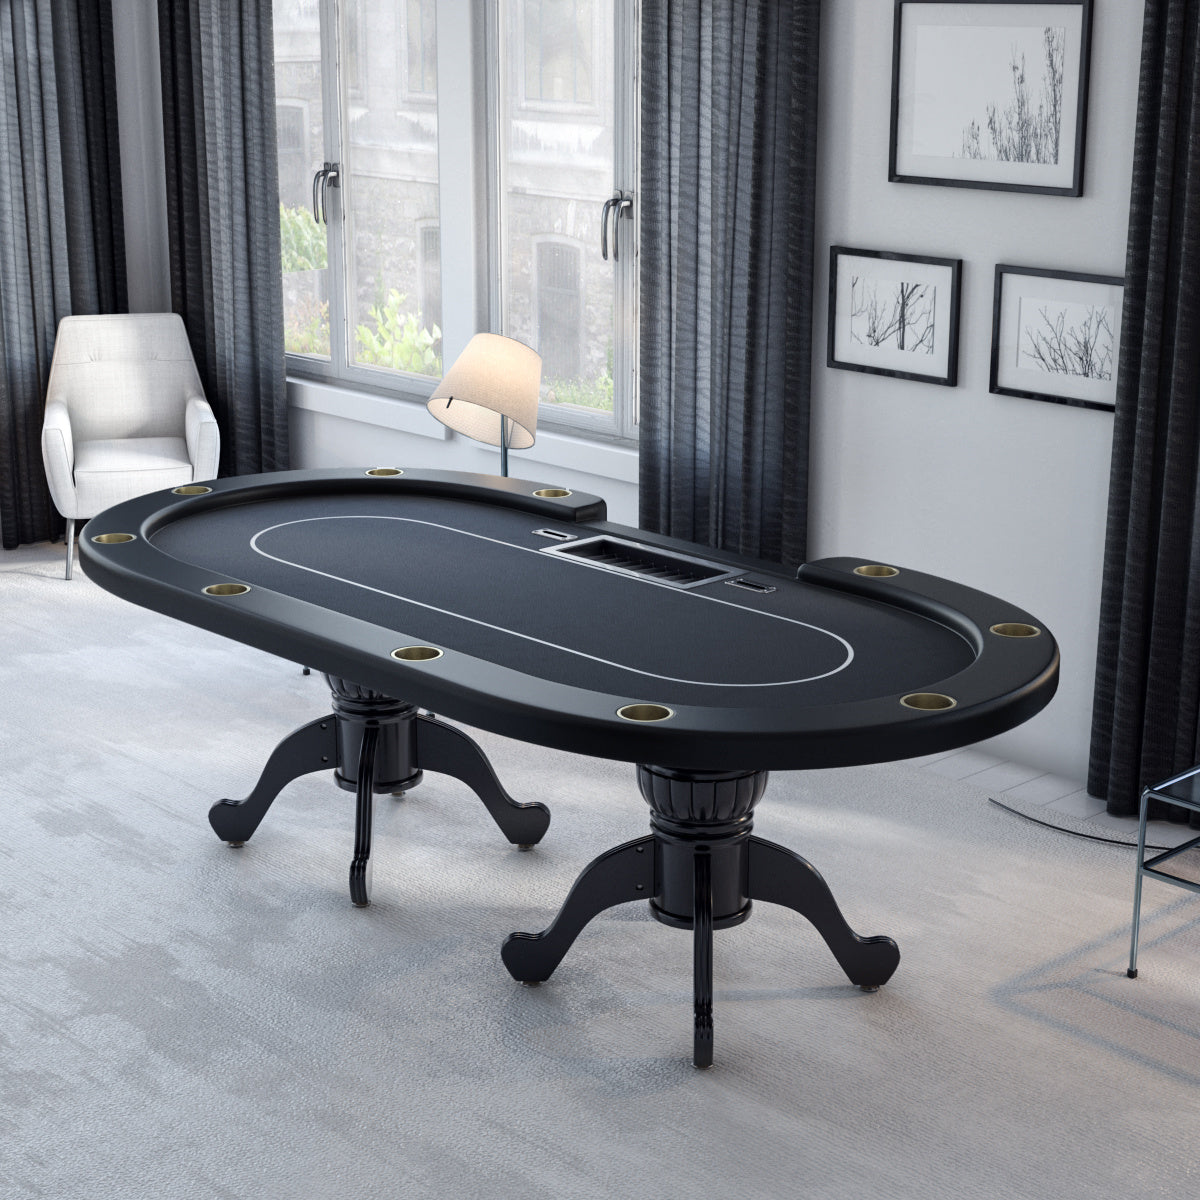 96" Aura Plus Poker Table with Jumbo Cup Holders Bet line Dealer Chip Tray Drop box